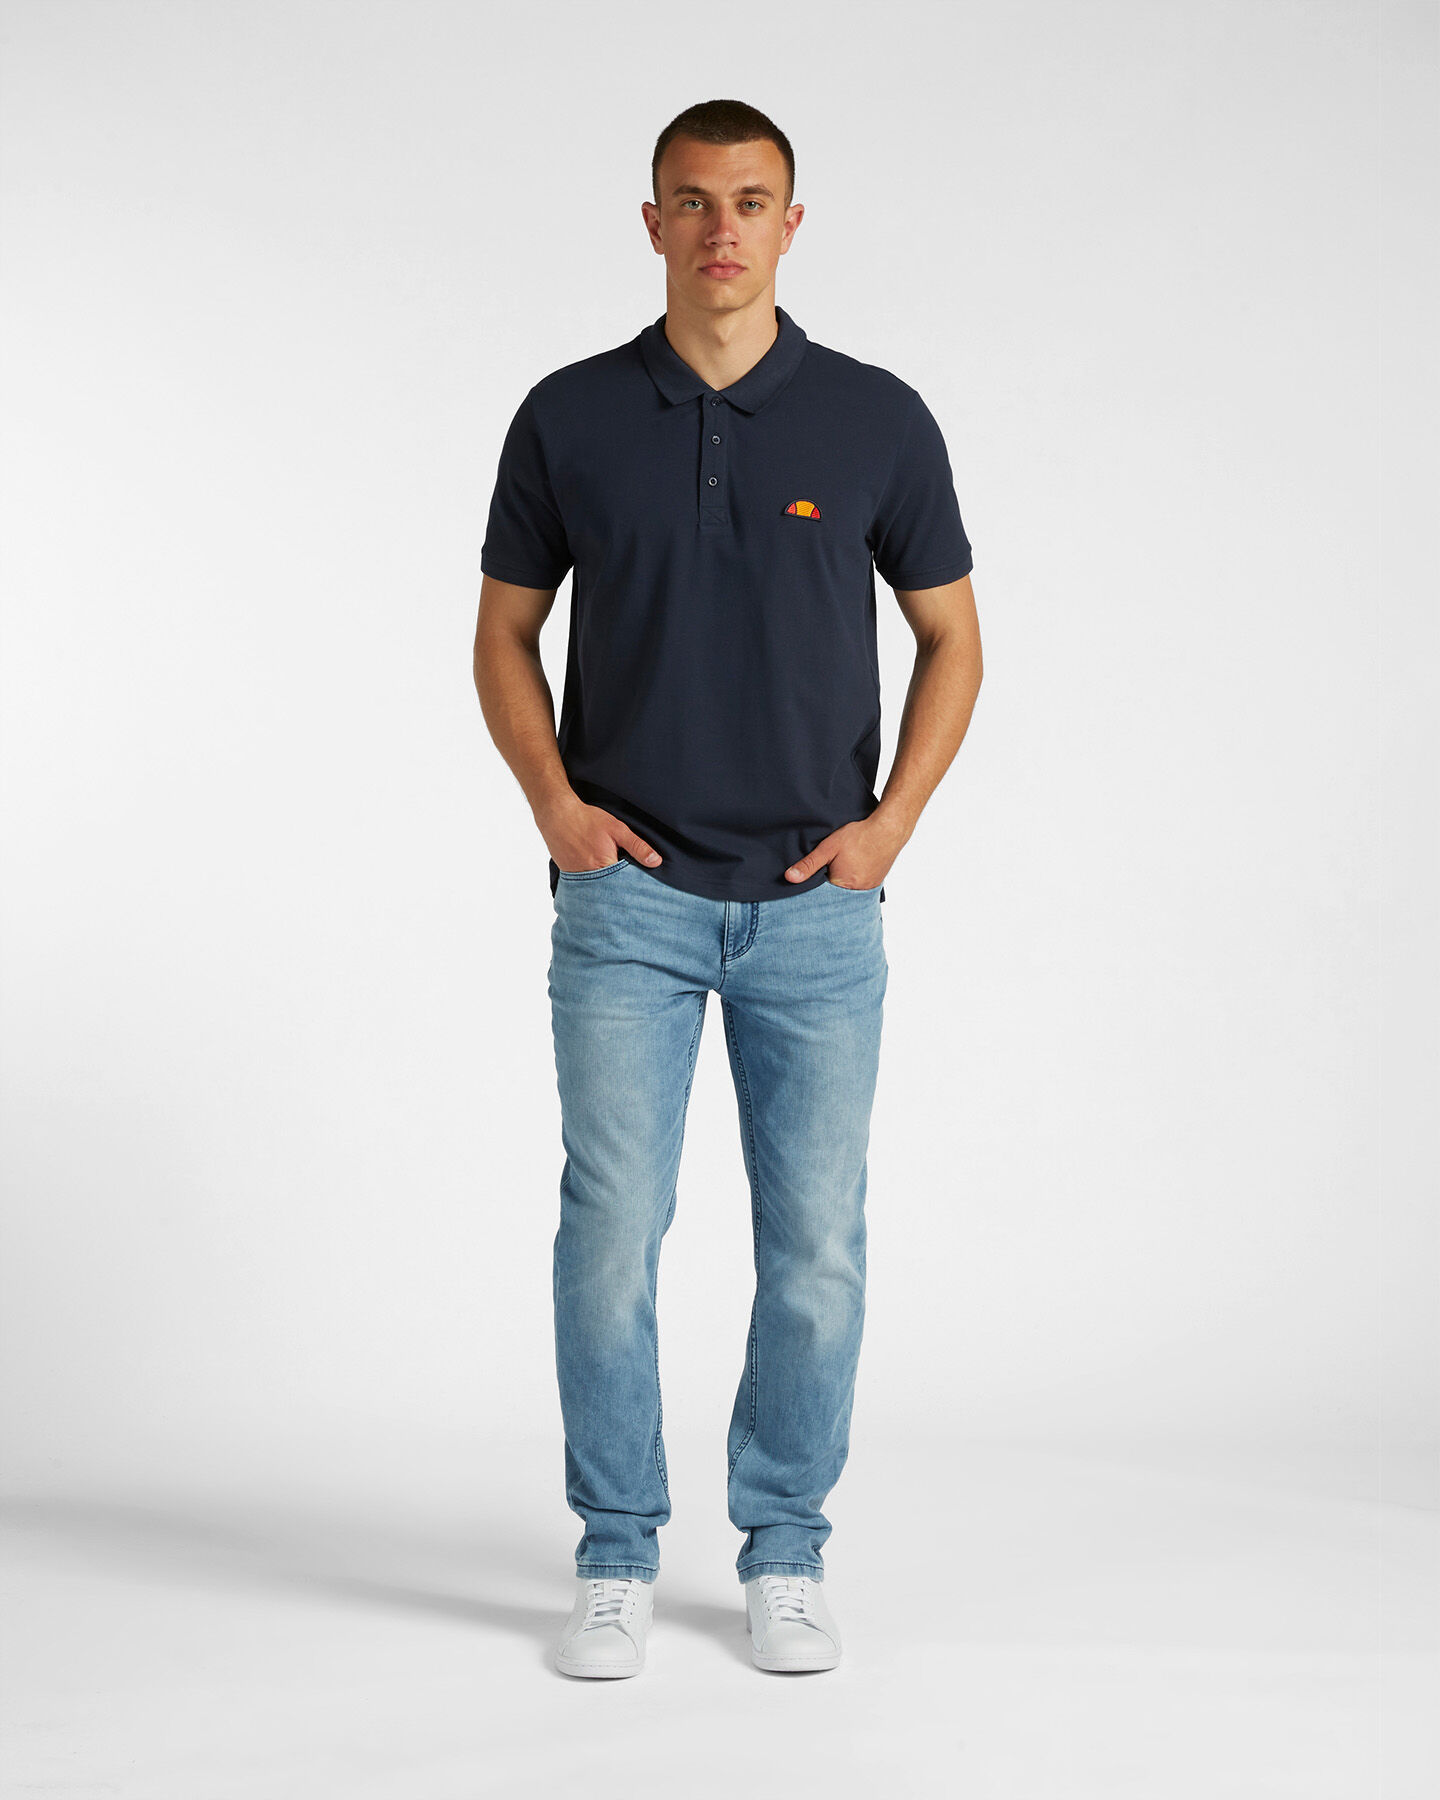  Polo ELLESSE CLASSIC PATCH M S4120101|858|S scatto 1